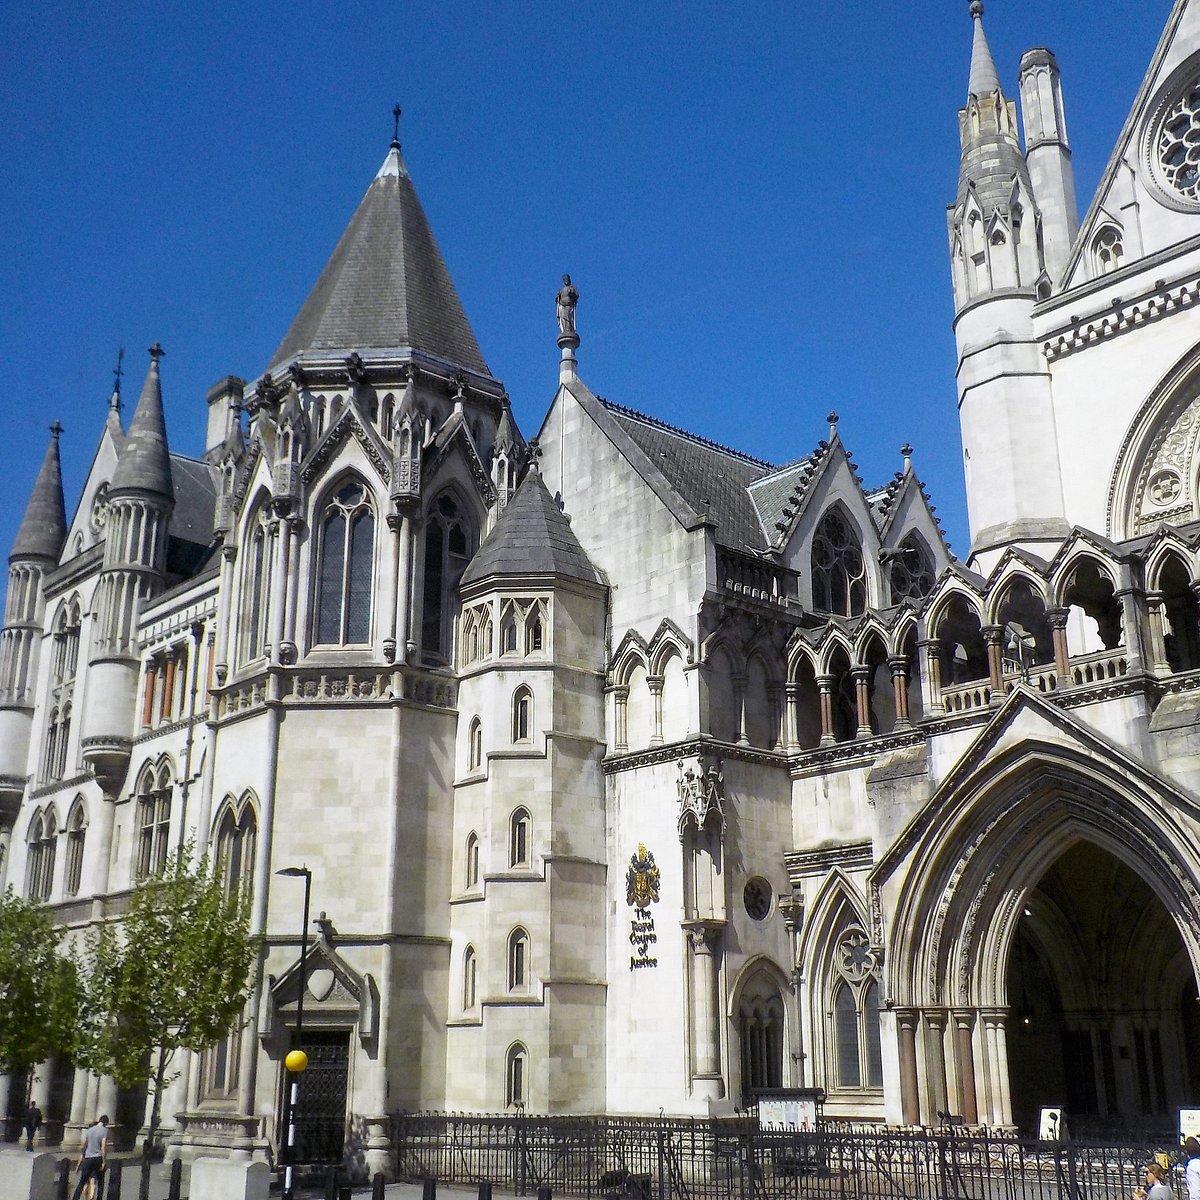 royal courts justice visit